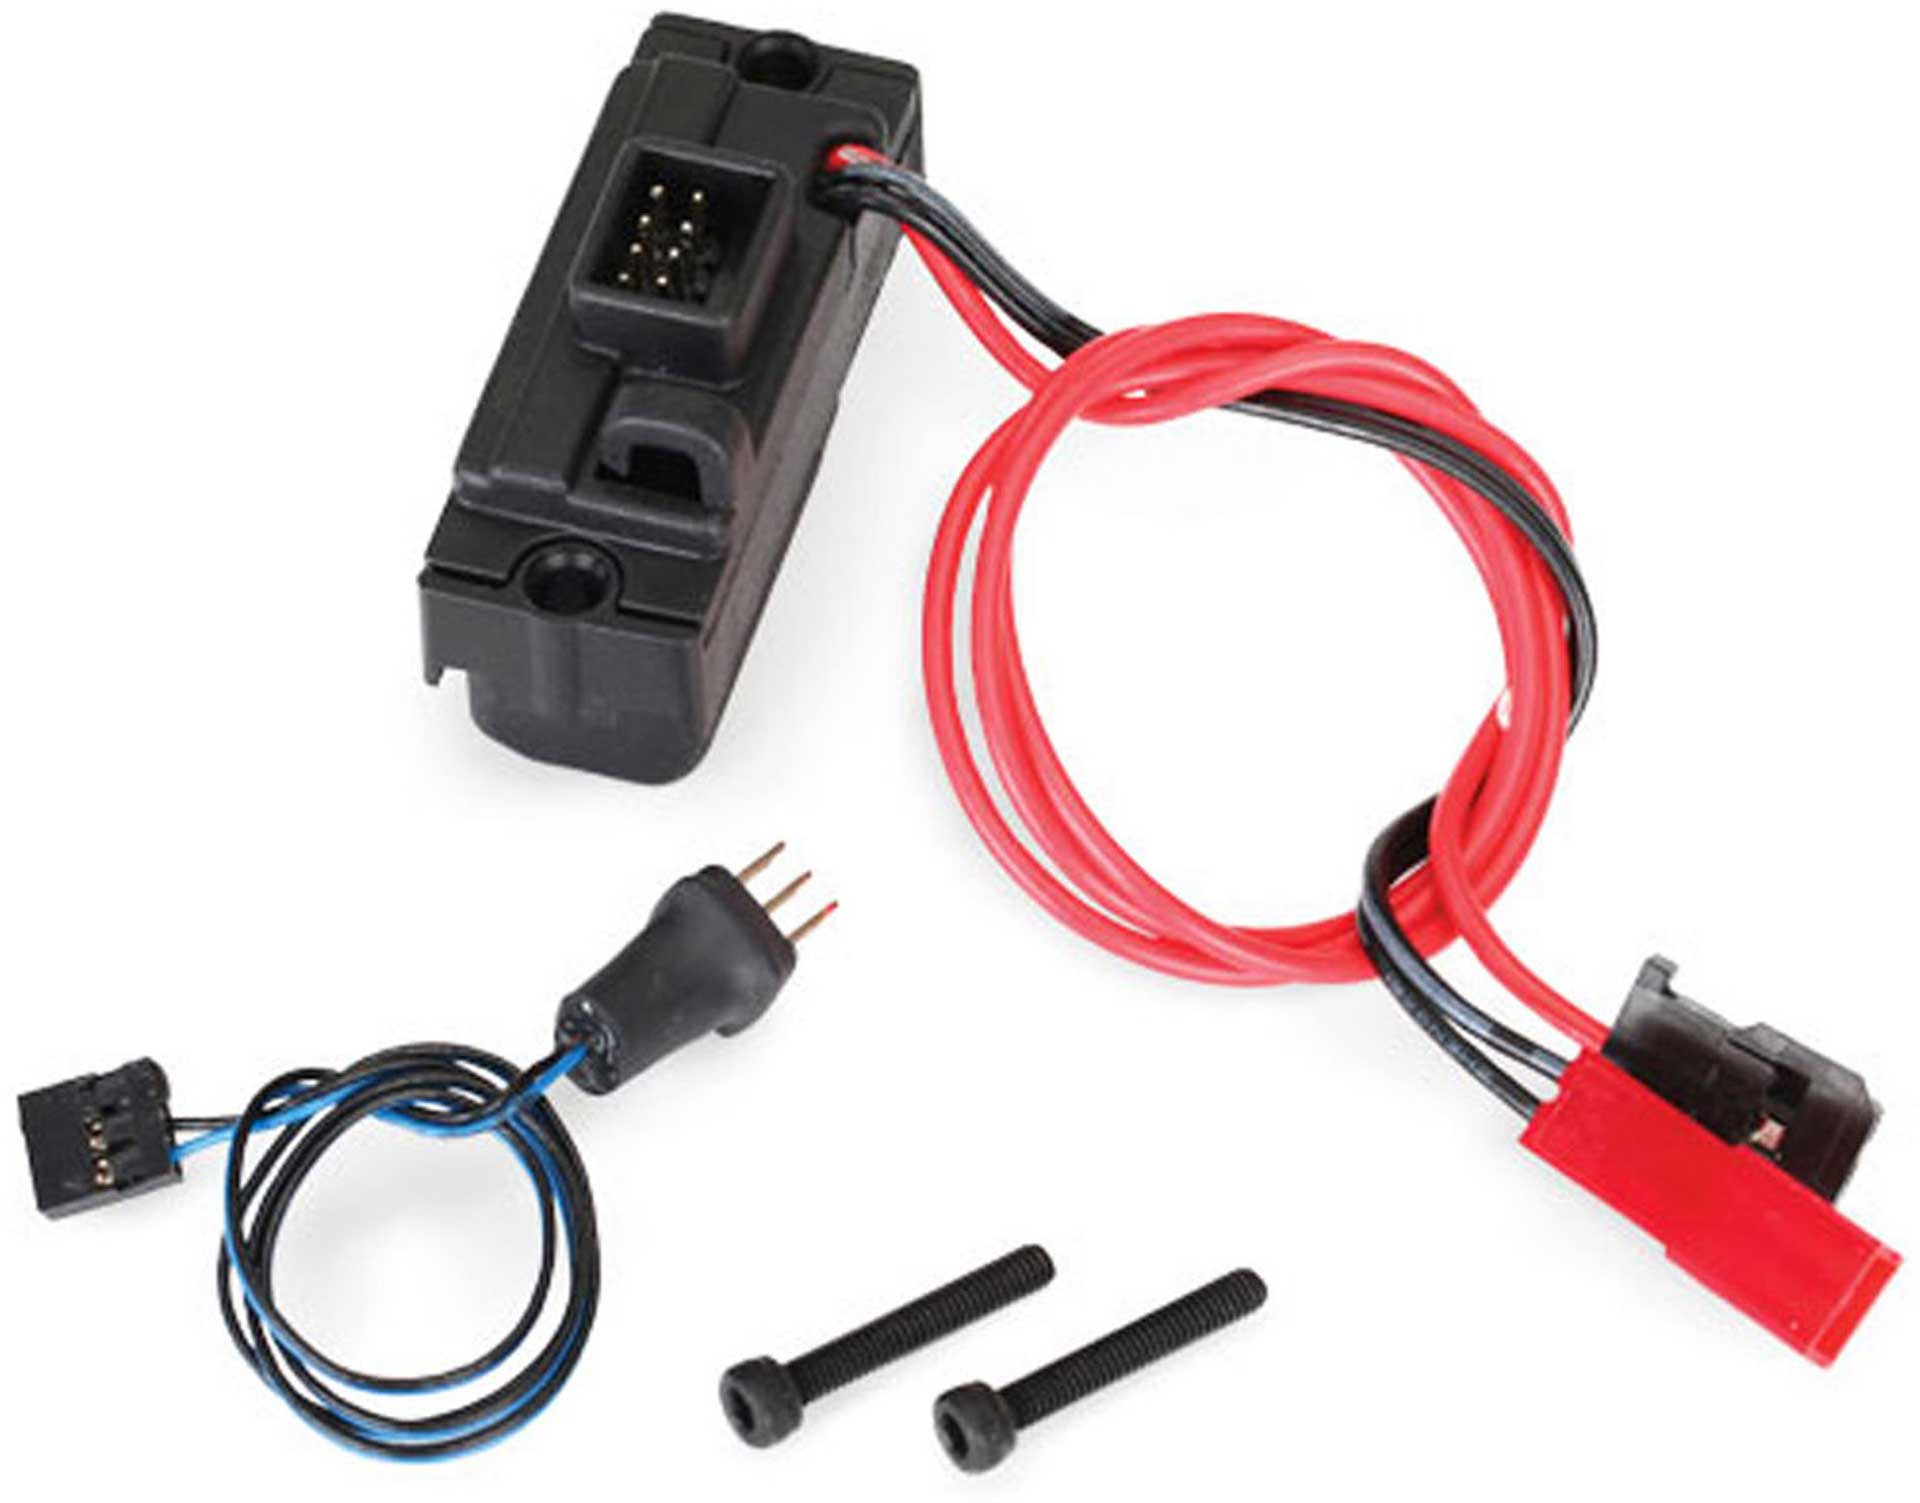 TRAXXAS LED LIGHTS, POWER SUPPLY, TRX-4/ 3-IN-1 WIRE HARNESS